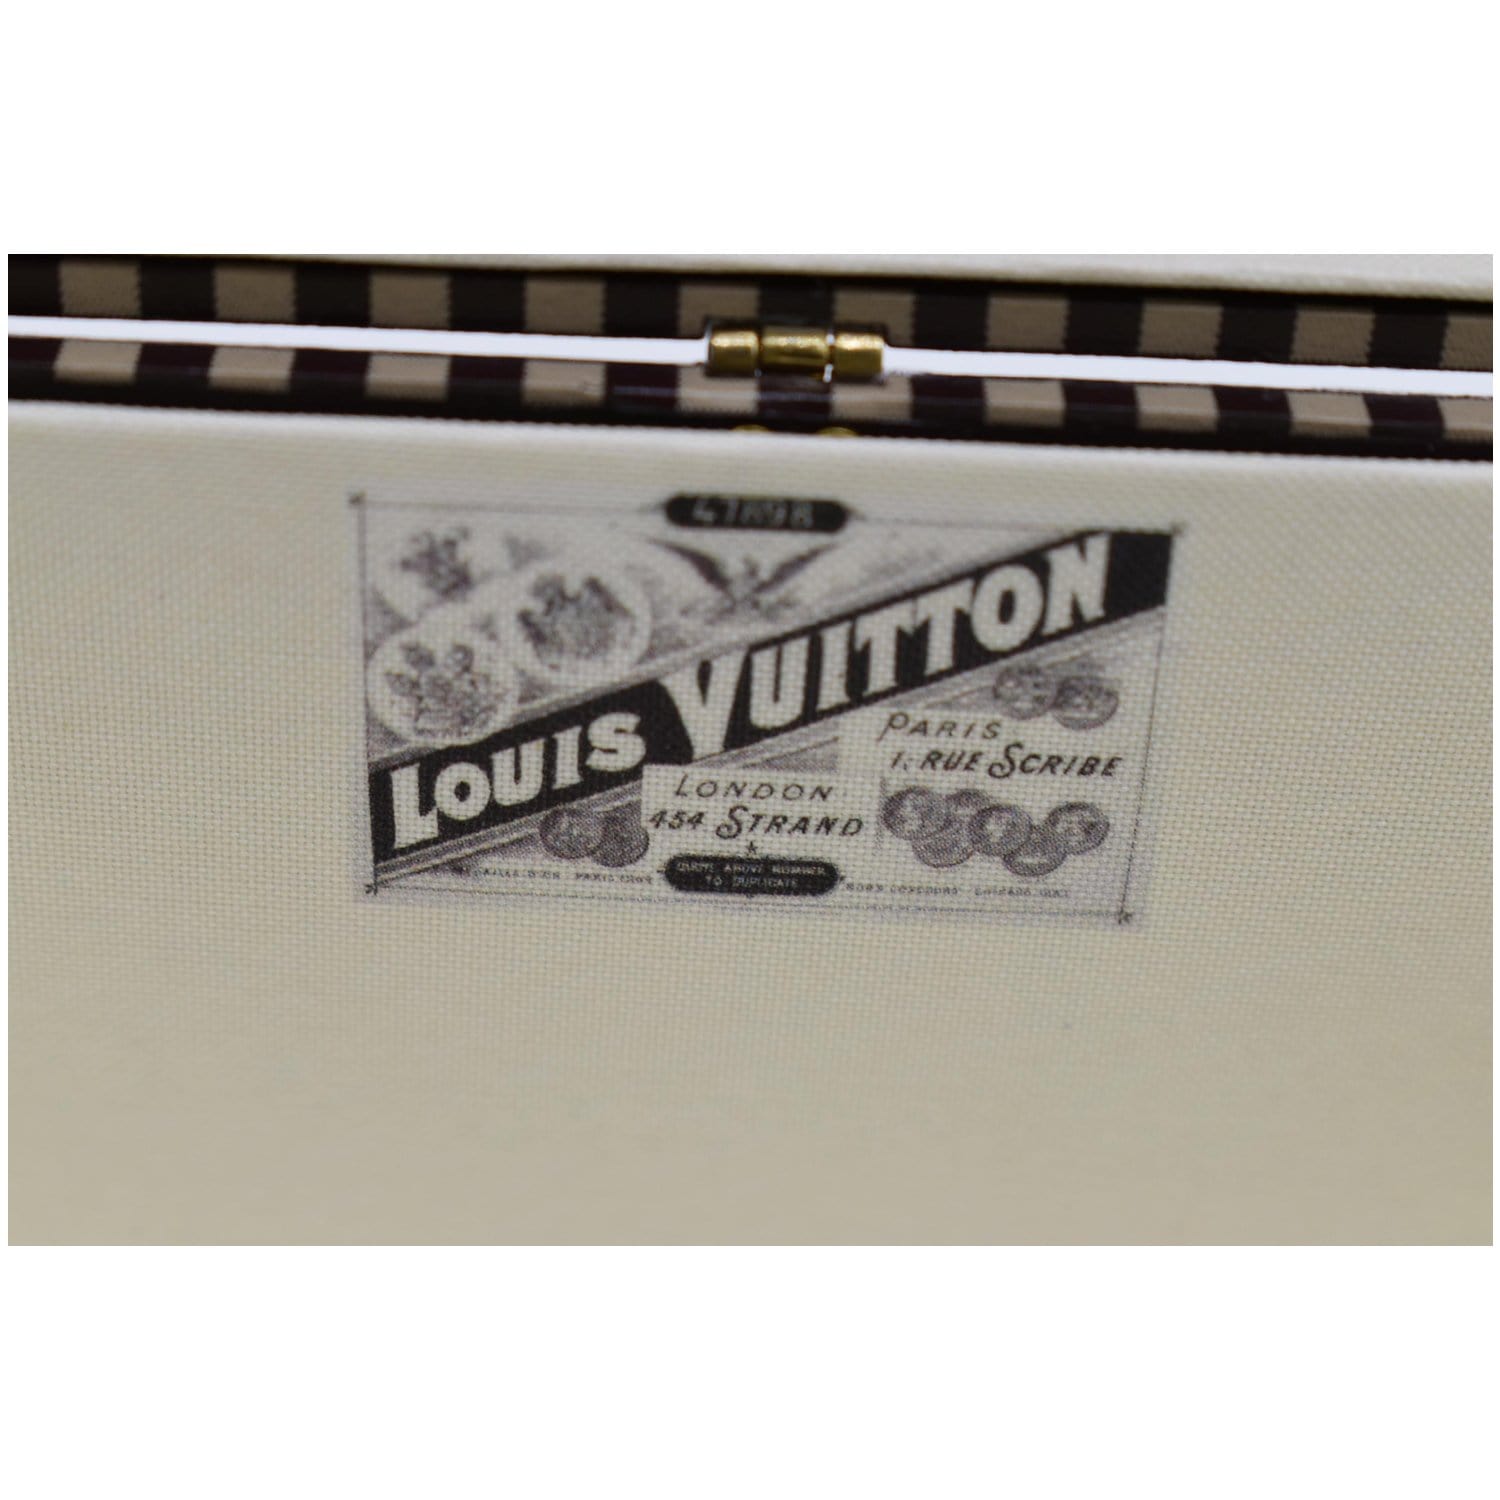 Authentic Louis Vuitton Box & More! 5.25”x 3.5” x 1” Wallet / Jewelry Size  